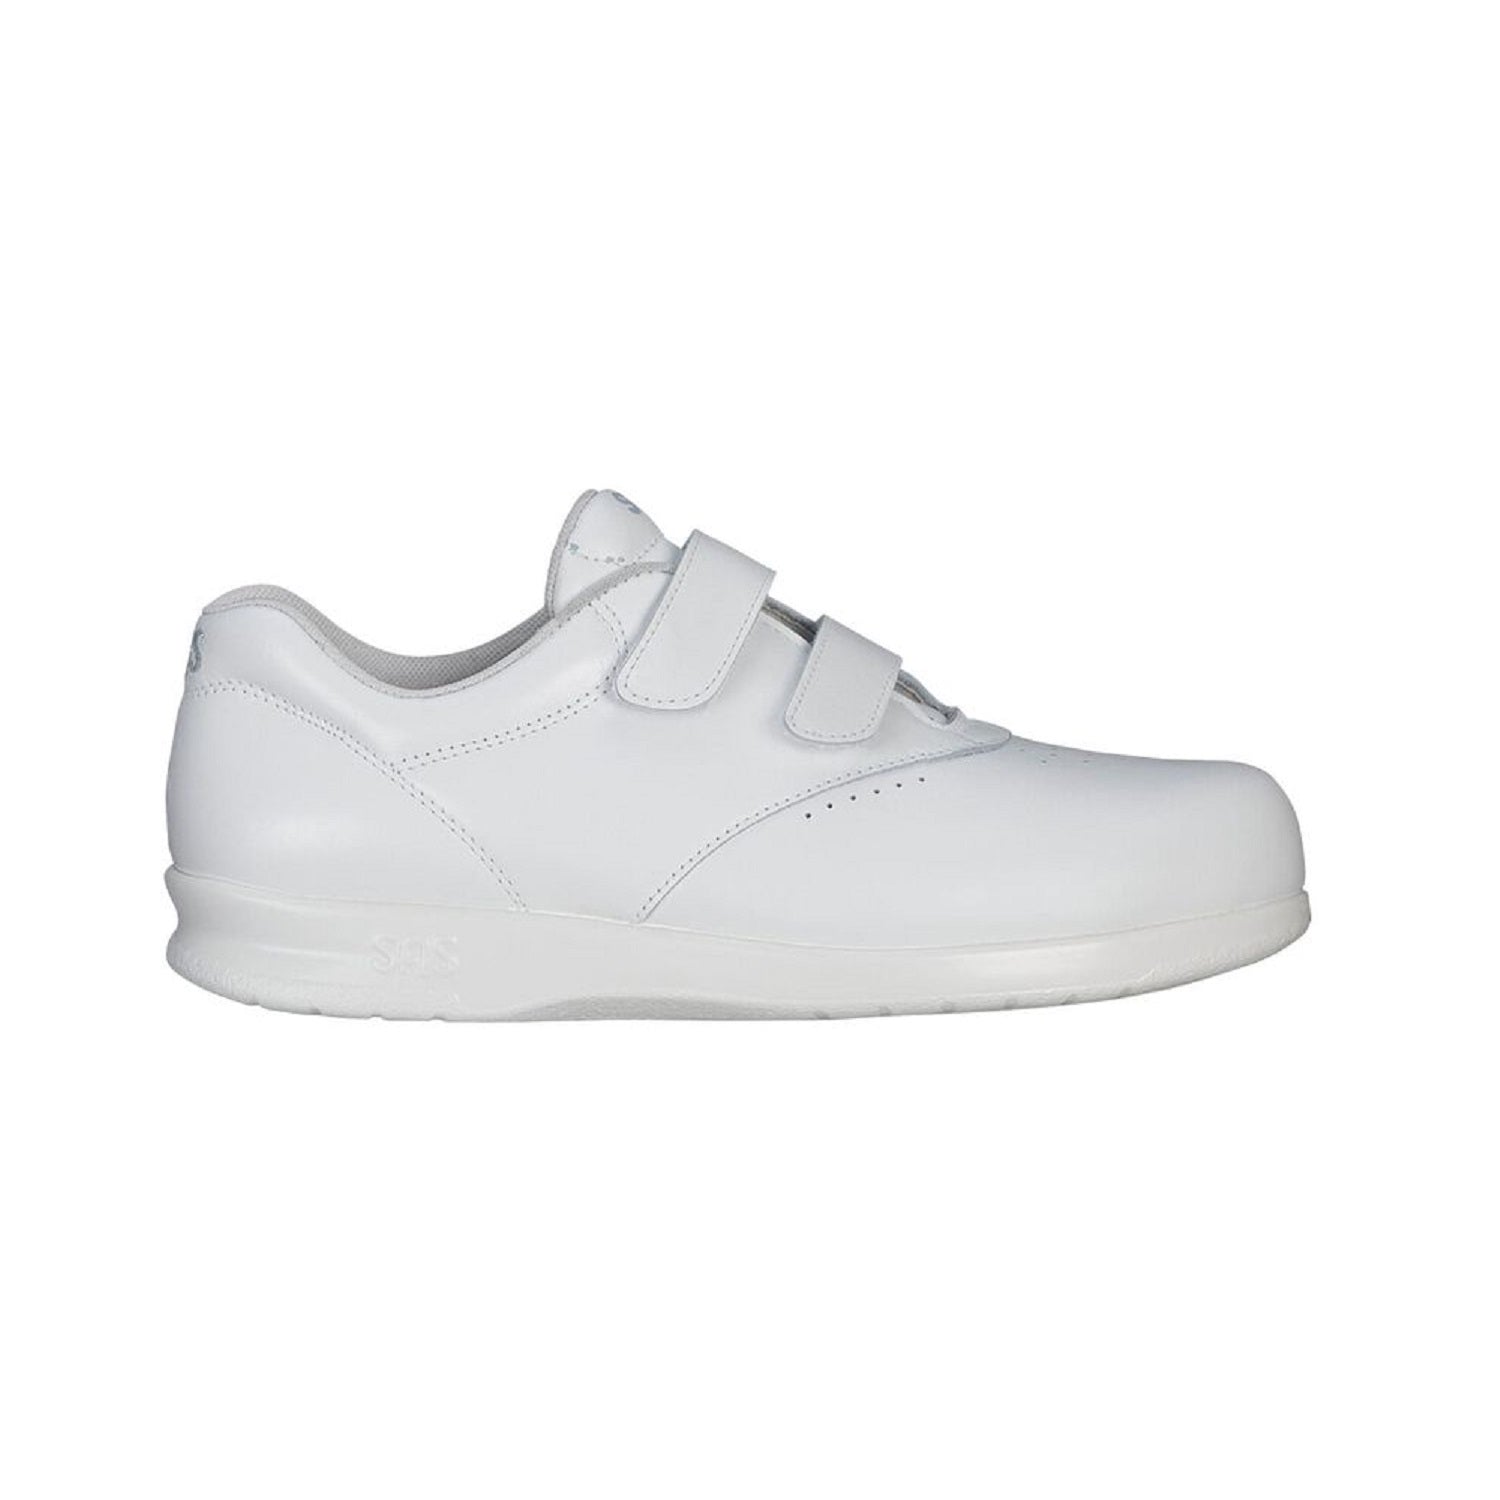 White leather shoe with two velcro straps.